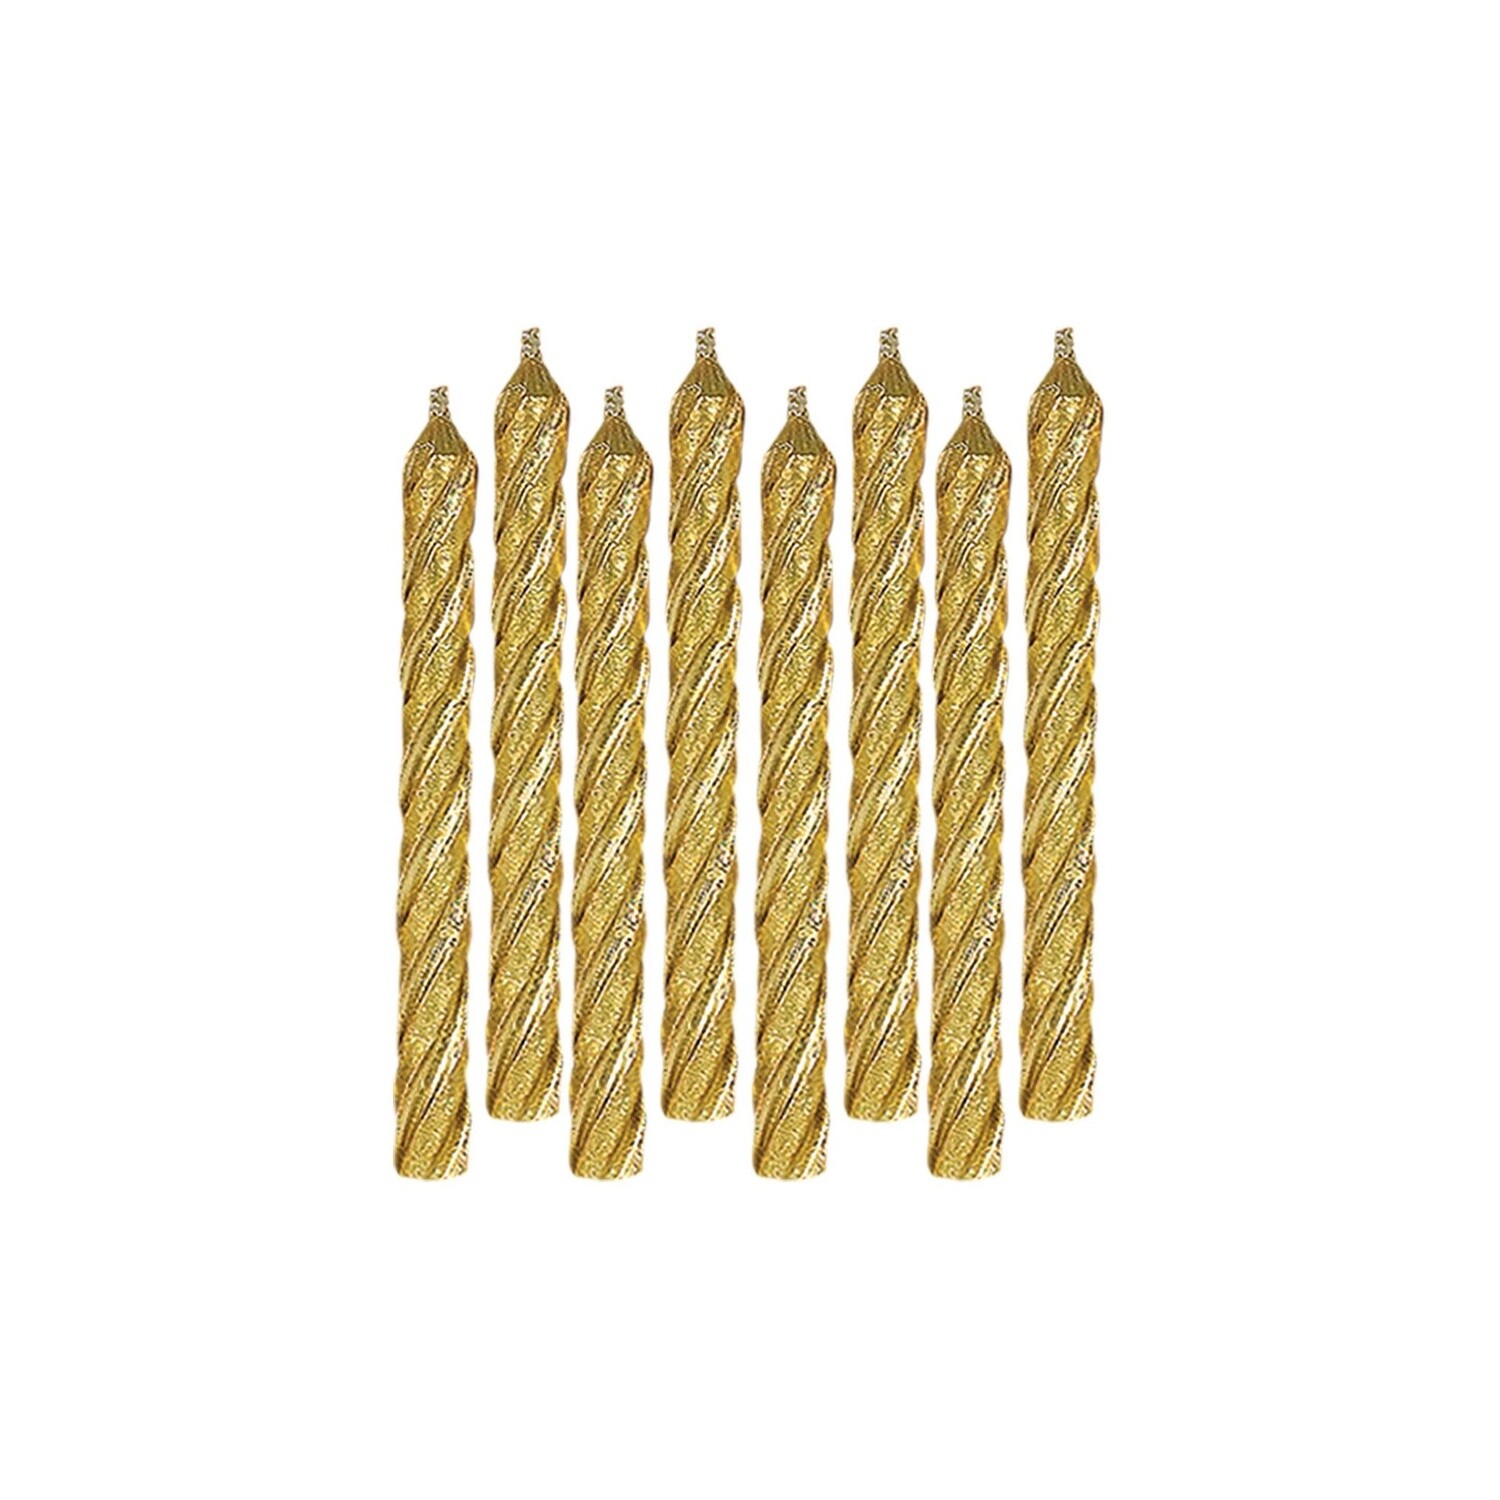 Large Spiral Candles - Gold 12CT